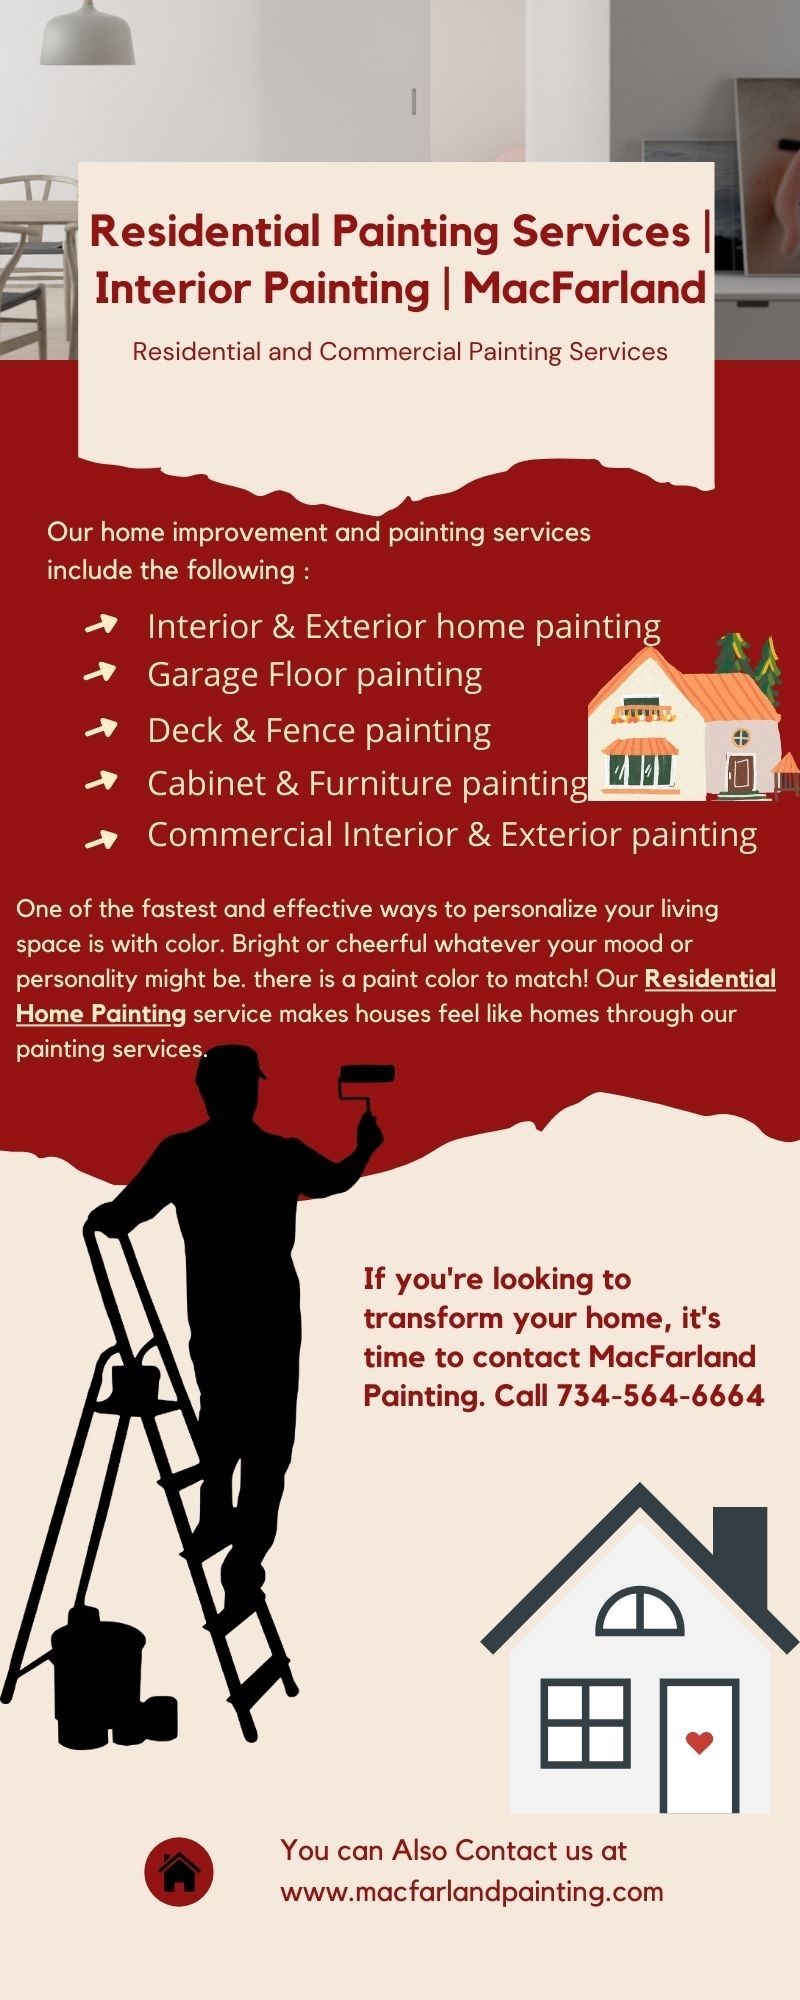 Residential Painting Services | Interior Painting | MacFarland